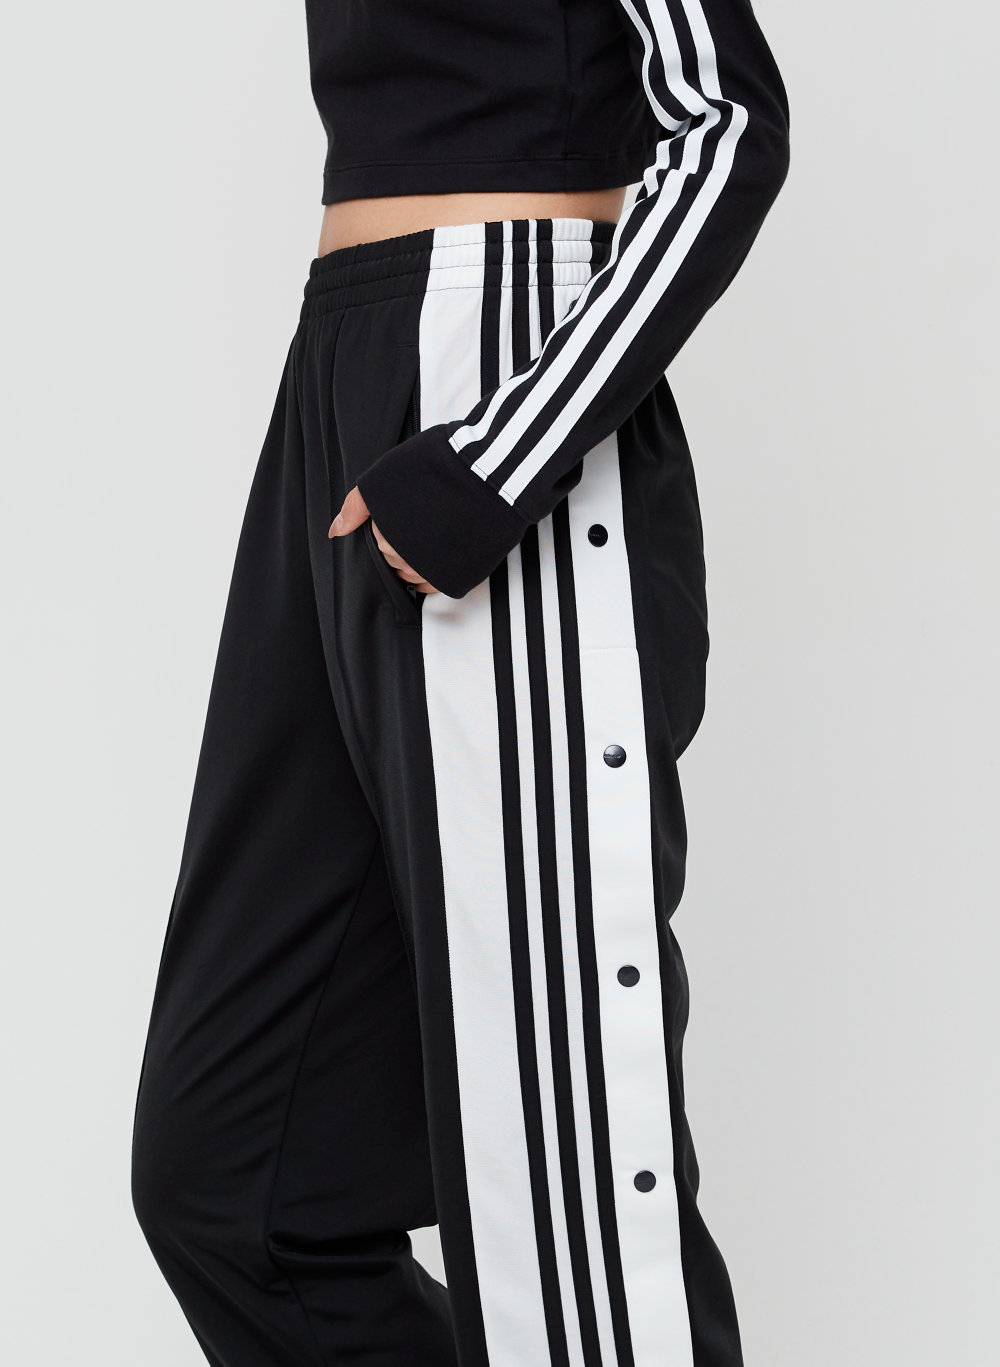 adidas track pants womens buttons side